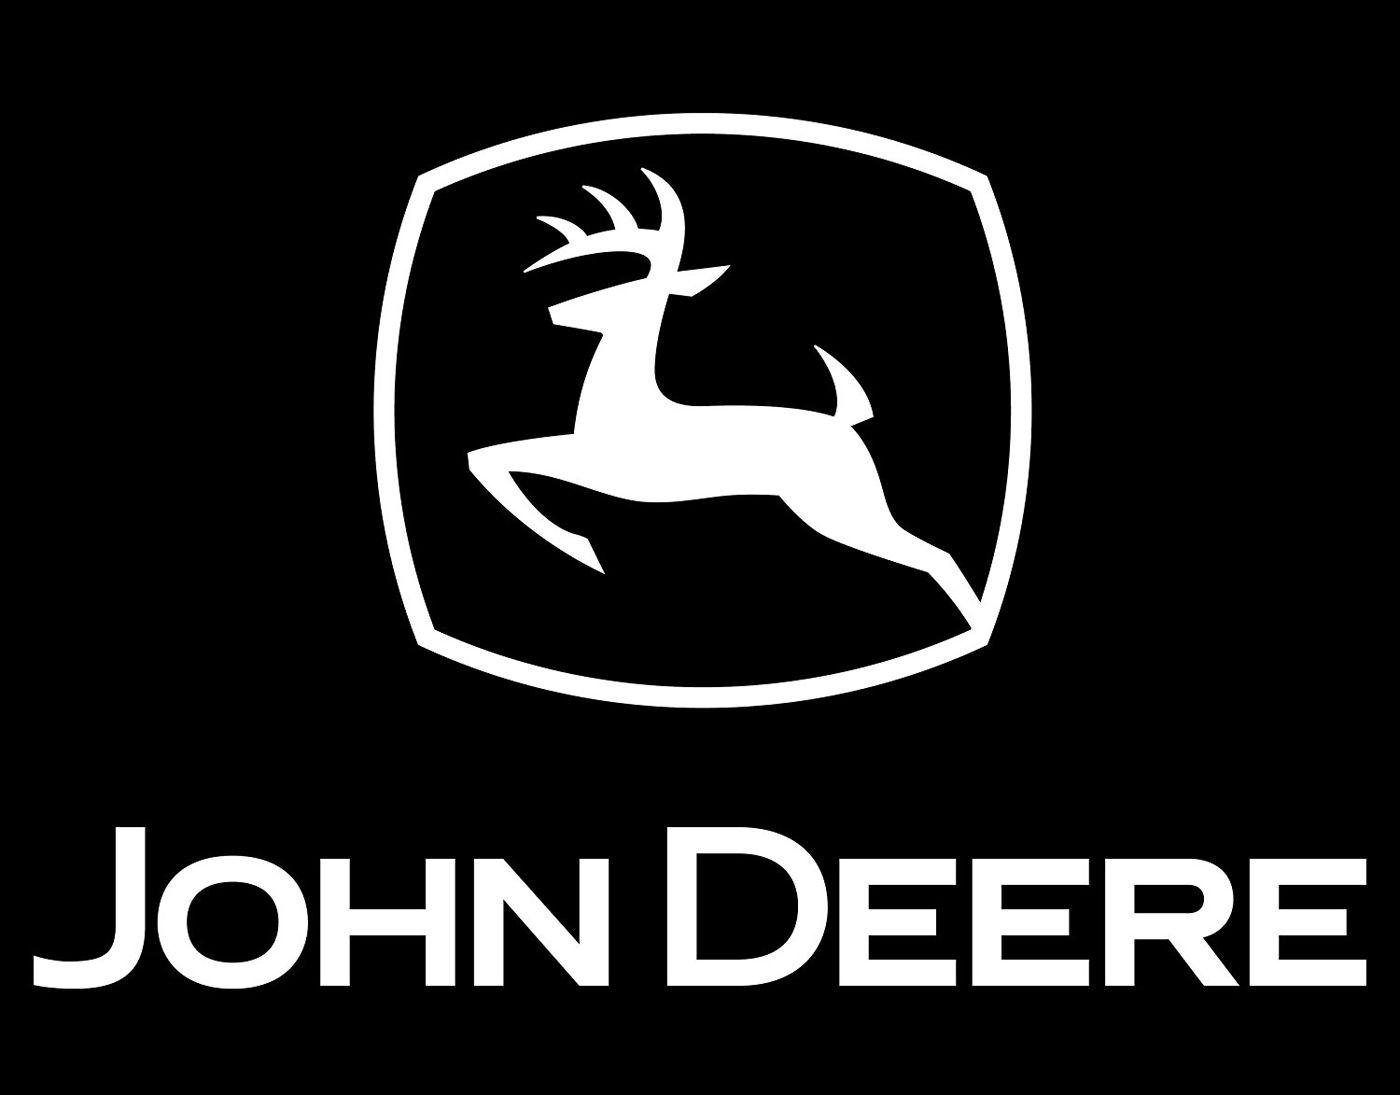 New John Deere Logo - John Deere Logo, John Deere Symbol Meaning, History and Evolution